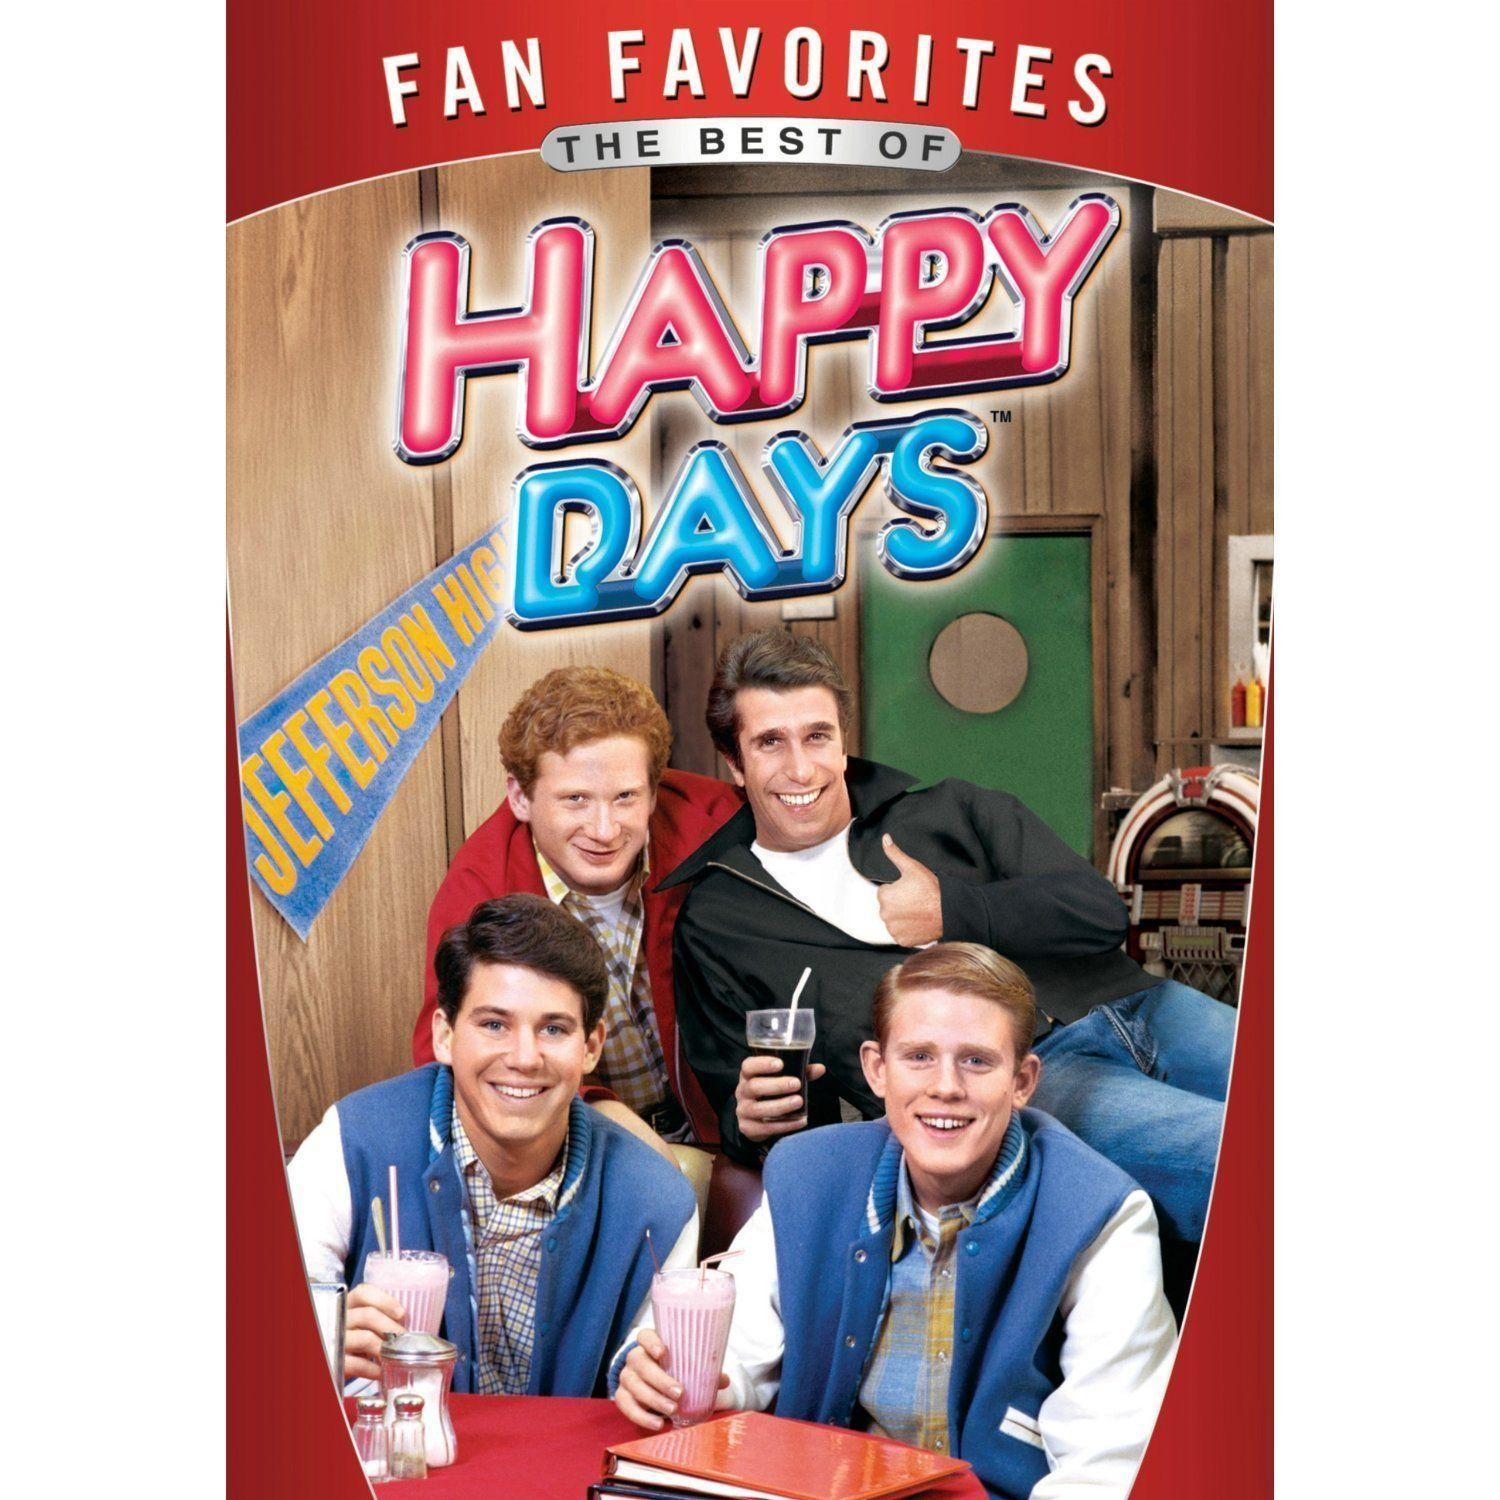 Happy Days TV Show. Happy Days Picture & Wallpaper far favrjfes